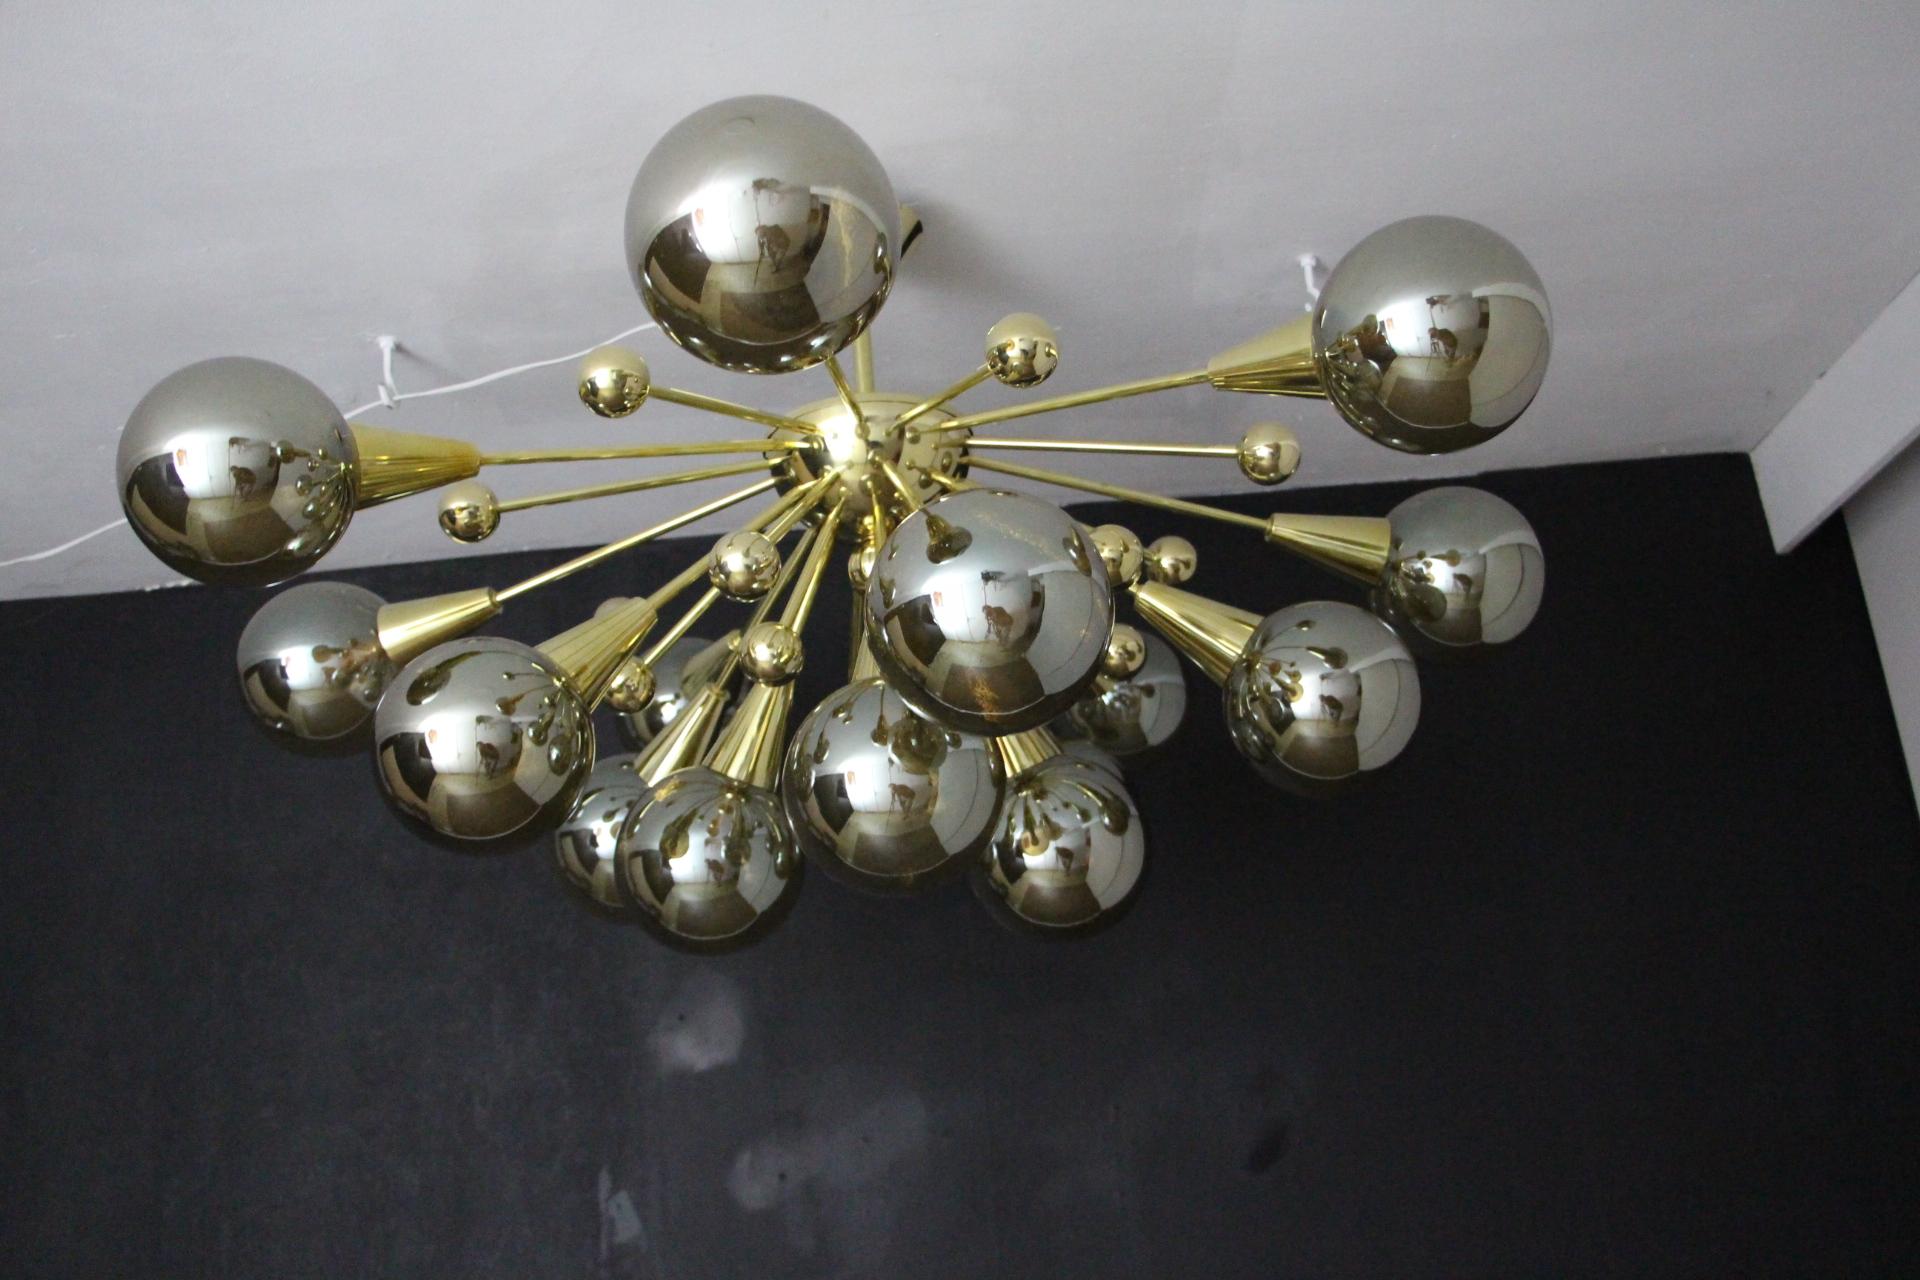 This brass chandelier features 15 hand blown half way between gold and silver murano glass globes and 15 brass balls extends on brass stems from its centre. When the light is on, globes change color and become more golden with golden bubbles